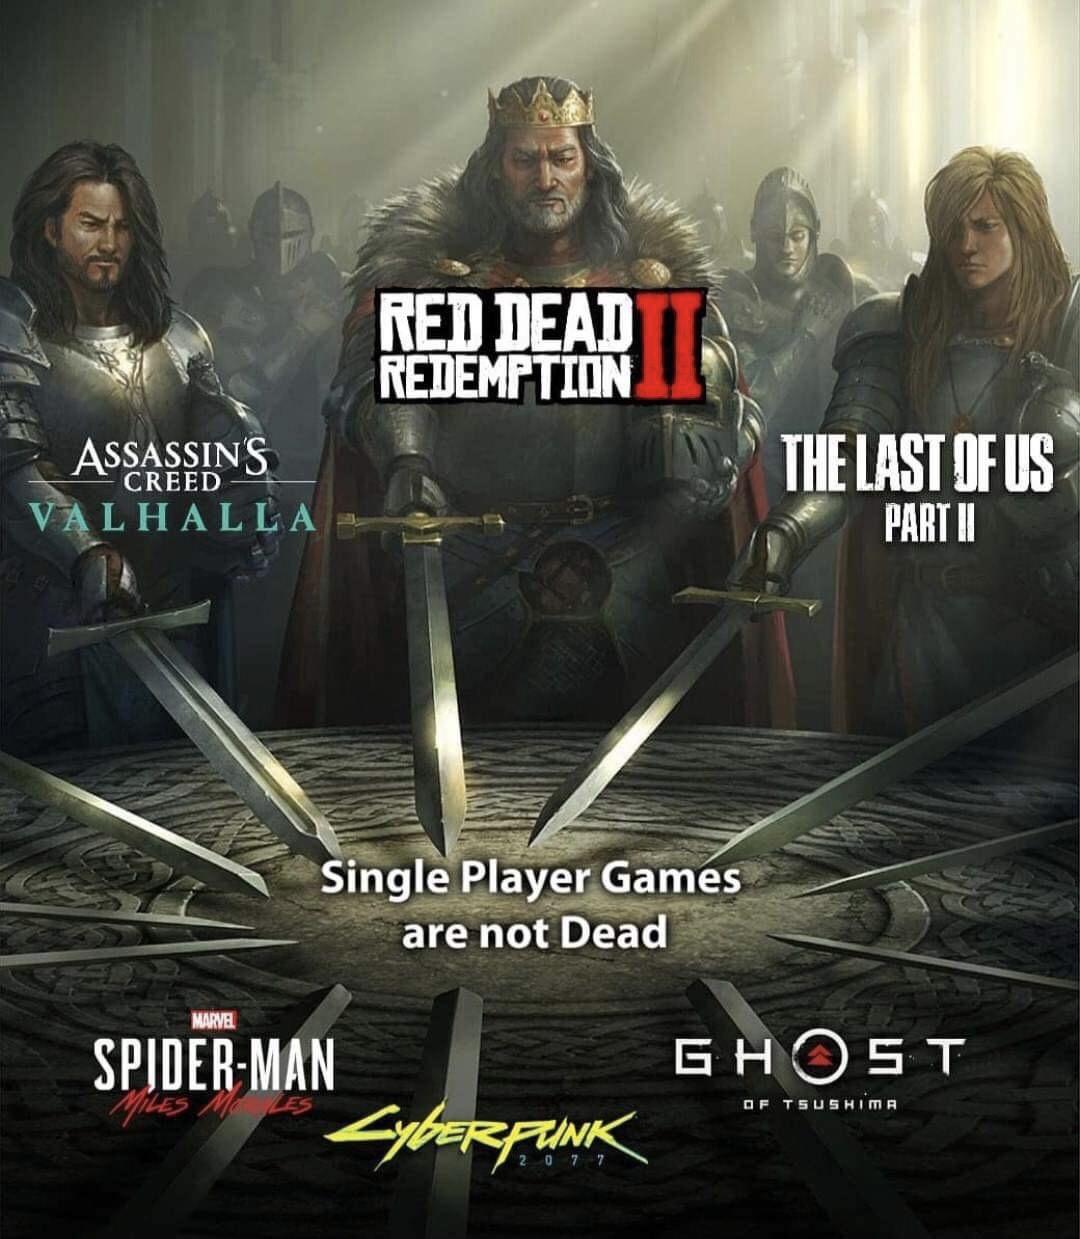 funny gaming memes - swords united meme template - Red Dead Redemption Assassin'S Valhalla The Last Of Us Creed Part Ii Single Player Games are not Dead Marve SpiderMan Ghost Of Tsushima Cyberfunk